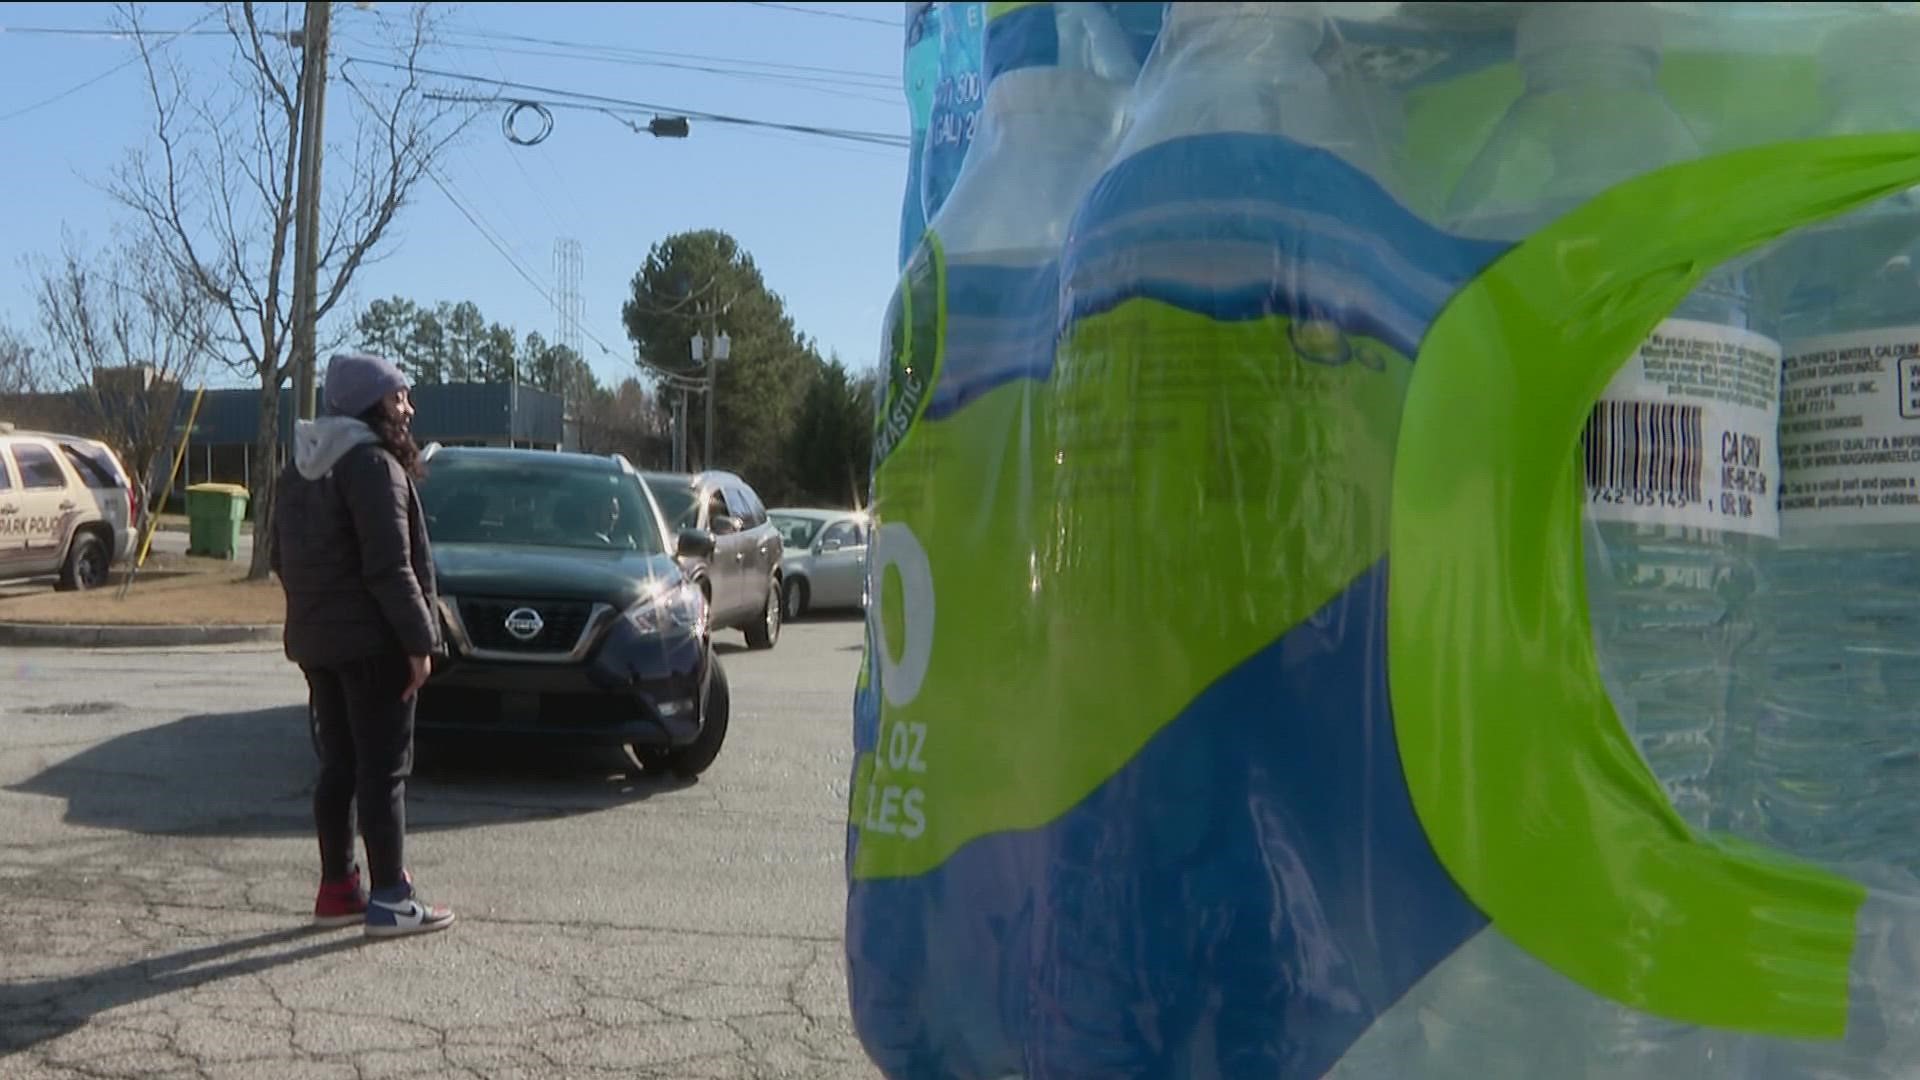 Clayton County Water Authority has not issued a timeline on when the water could return.